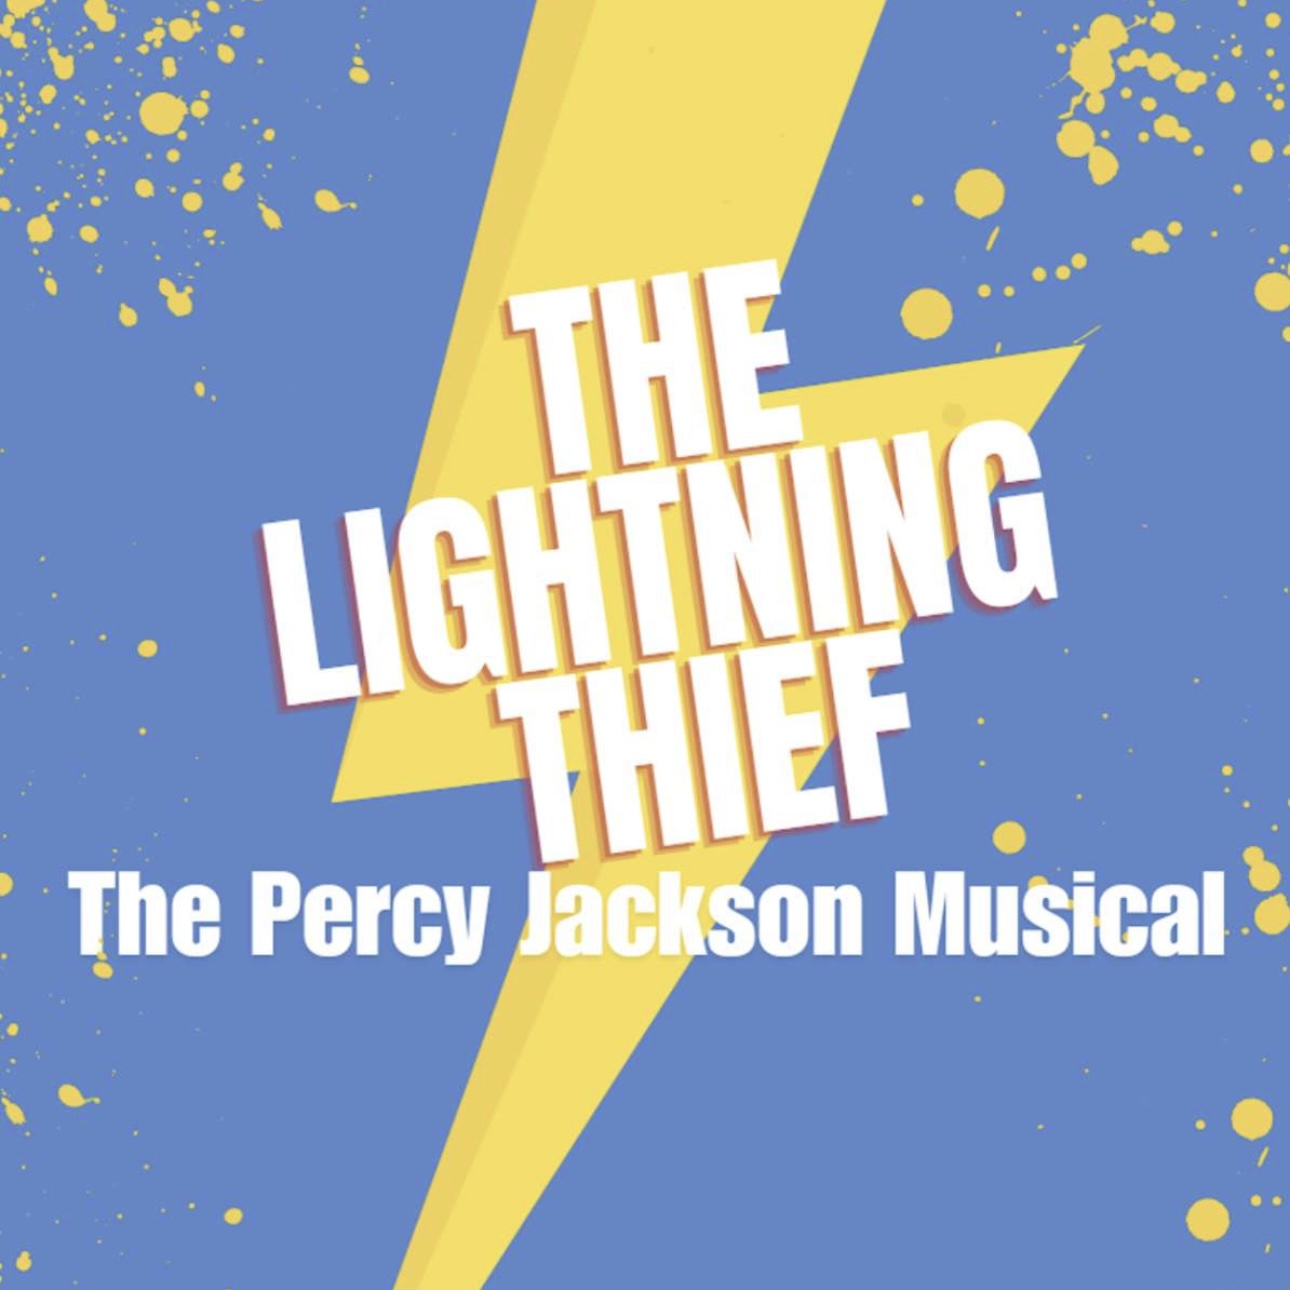 The logo for "The Lightning Thief: the Percy Jackson Musical." The image is of a yellow thunderbolt against a periwinkle background.